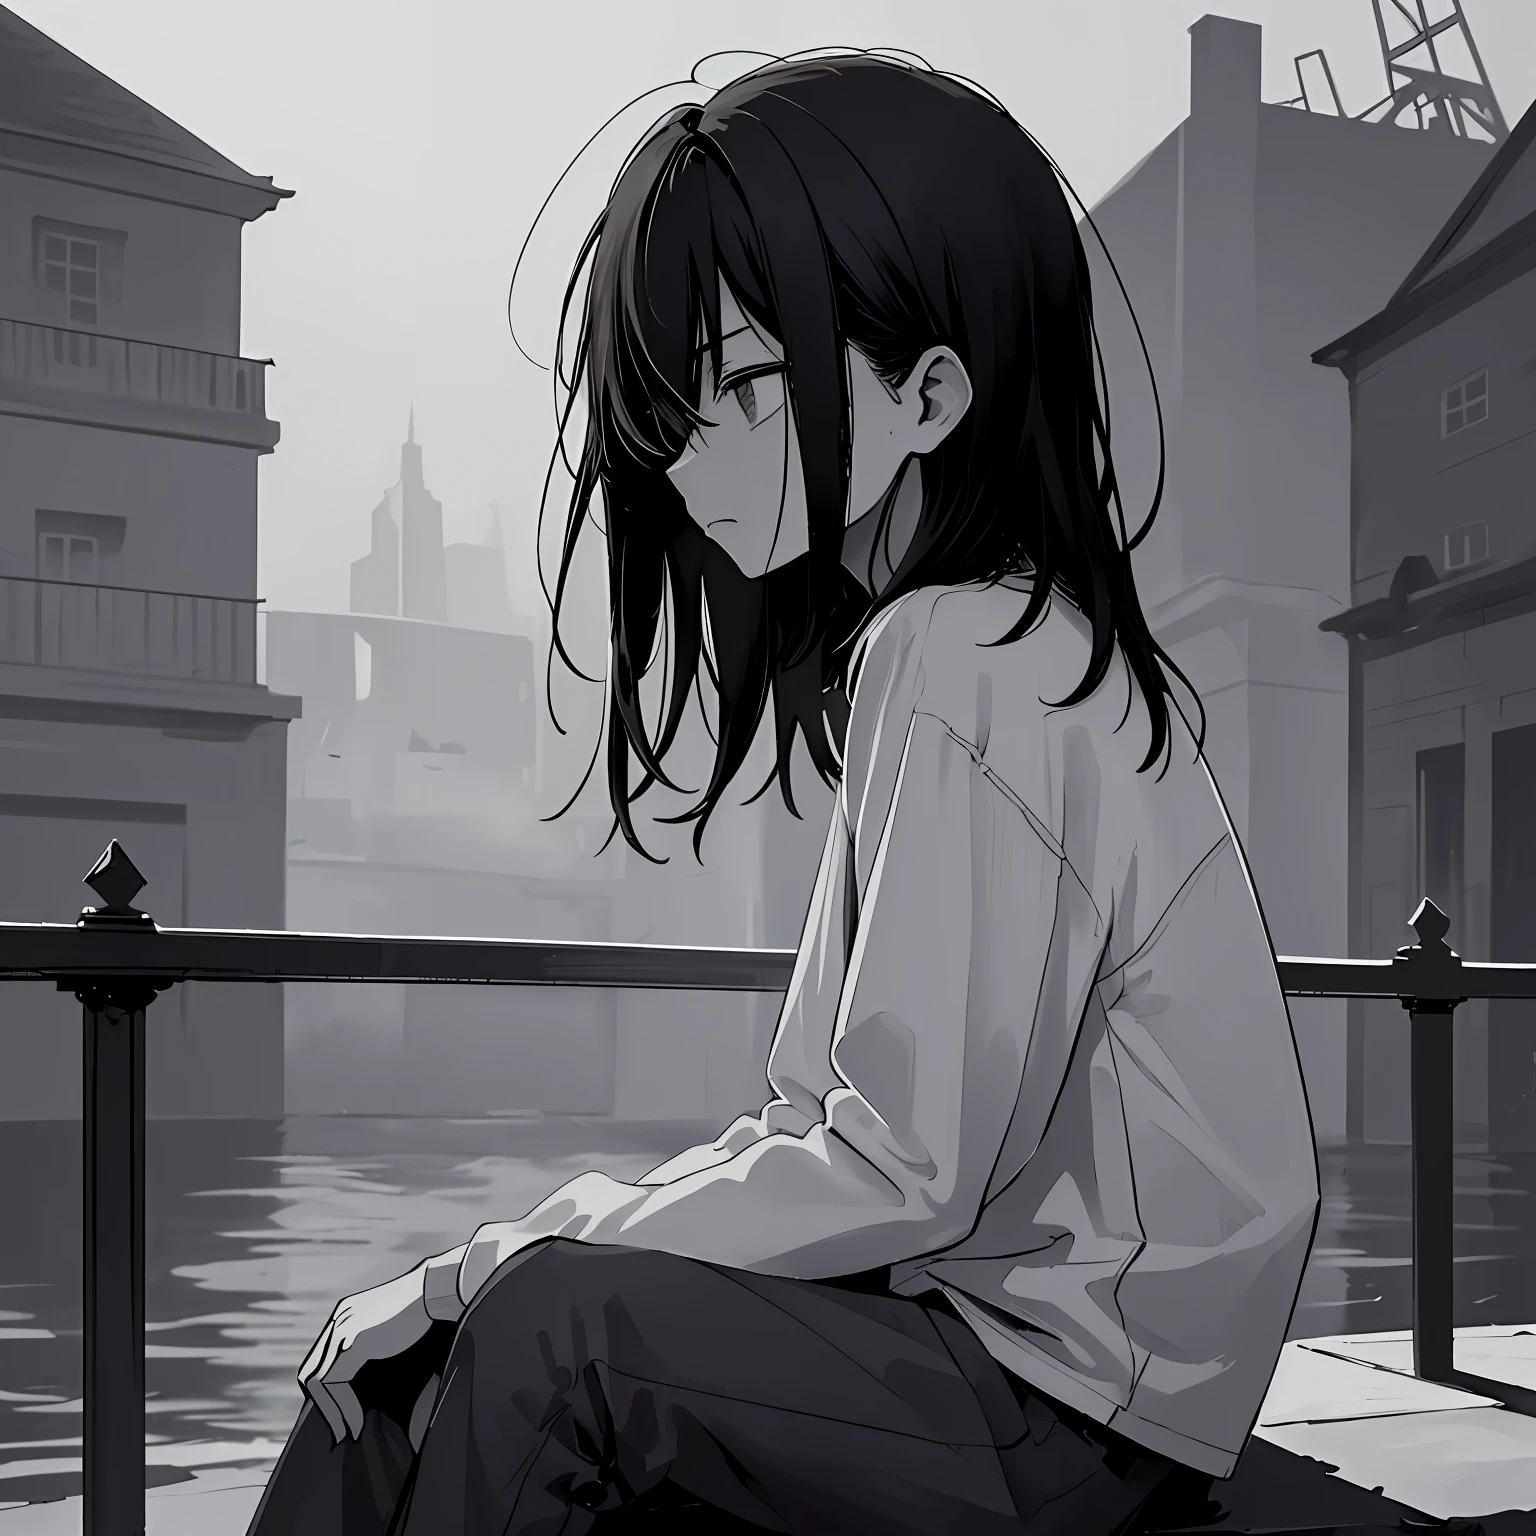 masterpiece, best quality, 1boy, solo, short_hair, looking_away, bangs, shirt, long_sleeves, dark hair, gloomy, moody, sad atmosphere, closed_mouth, morning world, soft shading, morning observer, shades of grey, complex background, dark backgrounds, outdoors, fullbody, sitting, sad, depression, long hair, melancholic expression